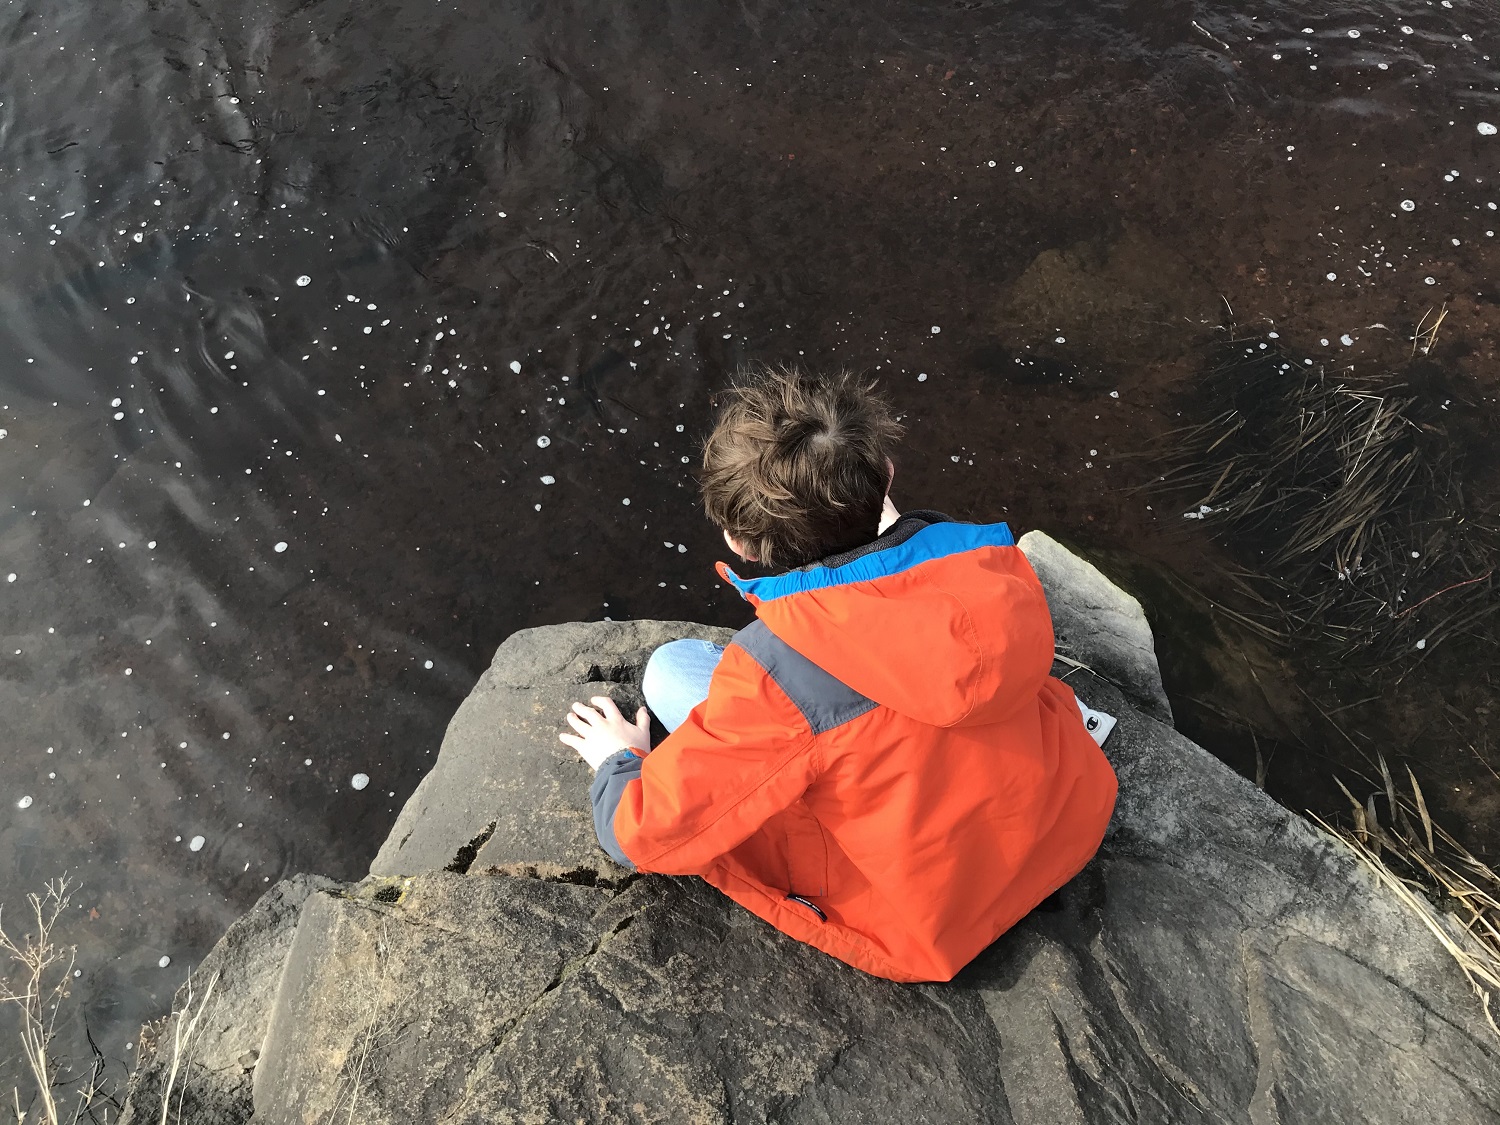 Forrest Mentzer leans over the Wisconsin River. He took a break from a family bike ride to climb on the rocks. (Rob Mentzer/WPR)